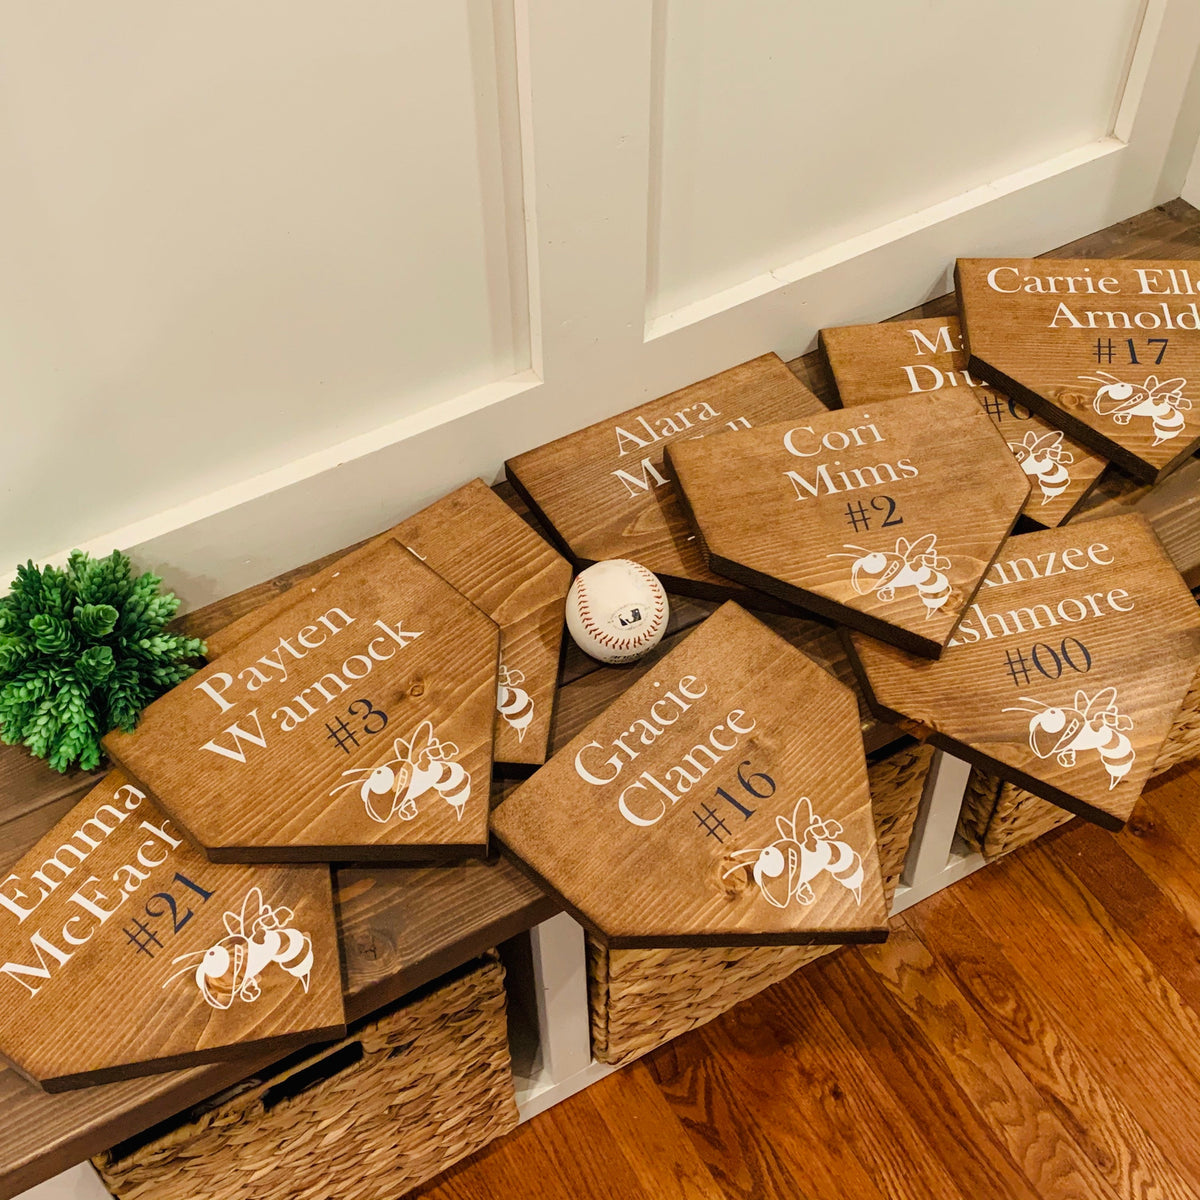 Baseball Mom Gifts – There's No Place Like Home Plate